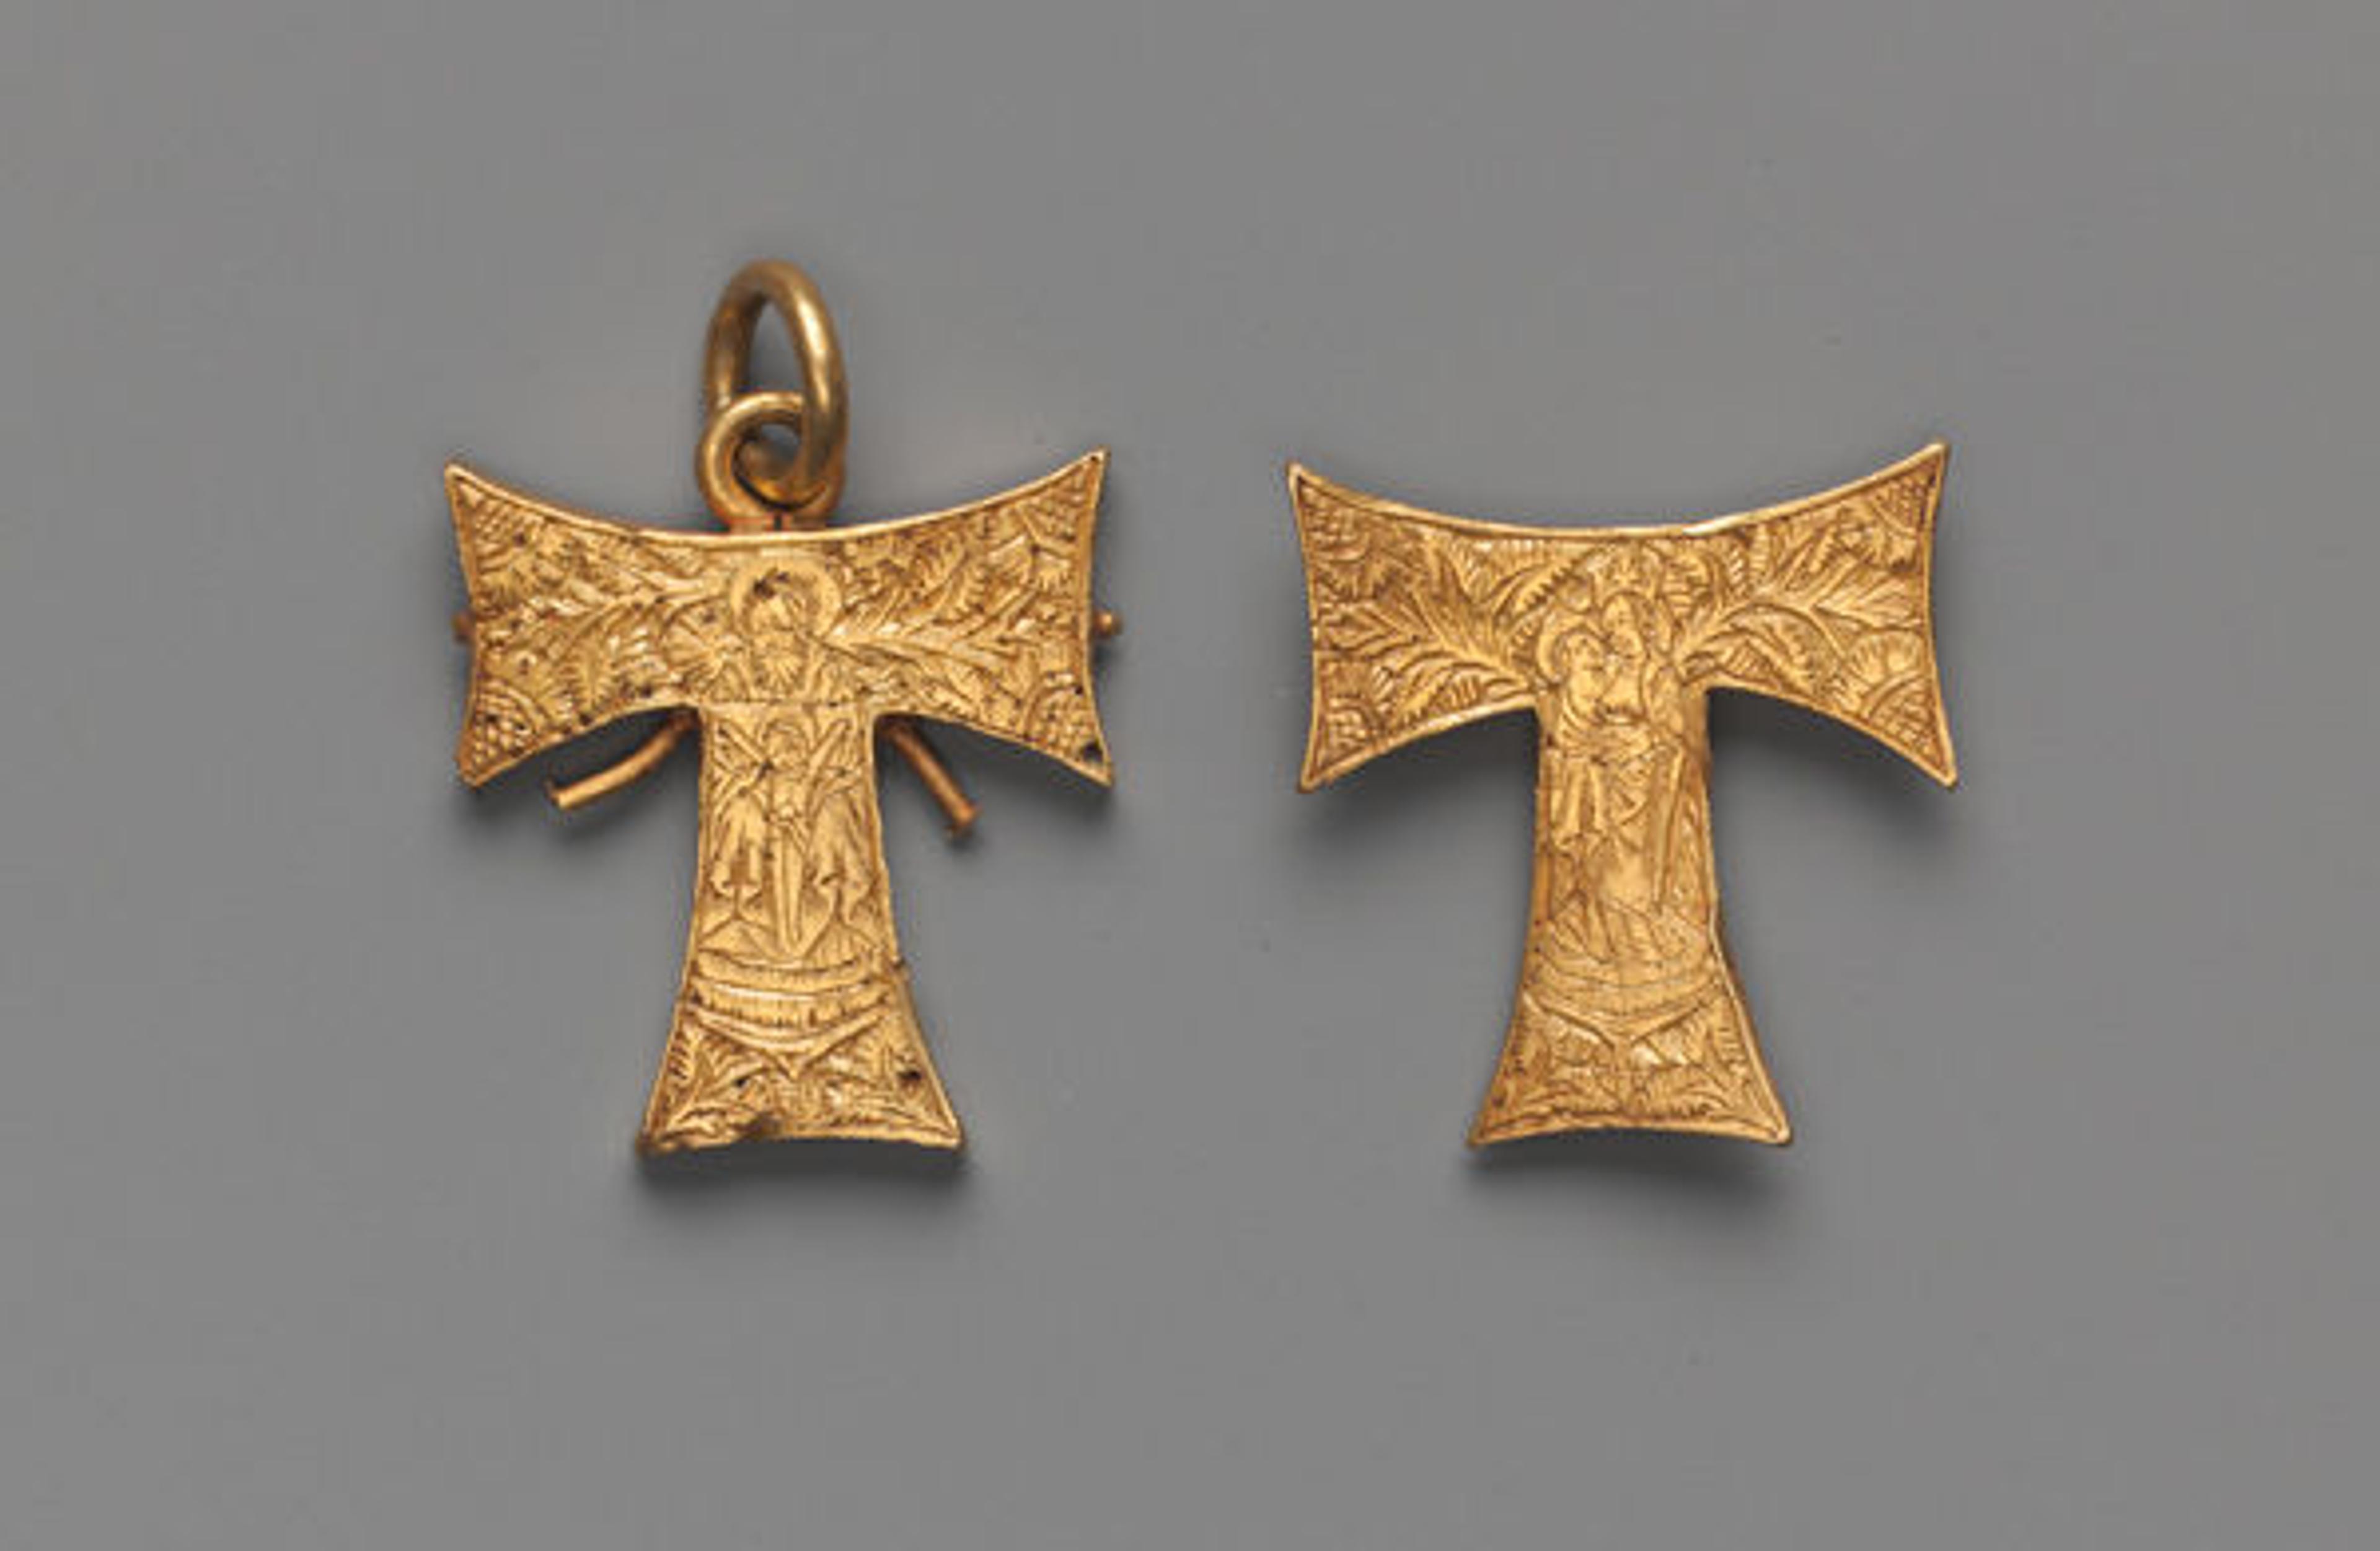 Pendant in the form of a tau cross, with the Trinity and the Virgin and Child (front and back), ca. 1485. British. Cast and engraved gold; H. 1 1/8 in. (2.8 cm). The Metropolitan Museum of Art, New York, The Cloisters Collection, 1990 (1990.283)